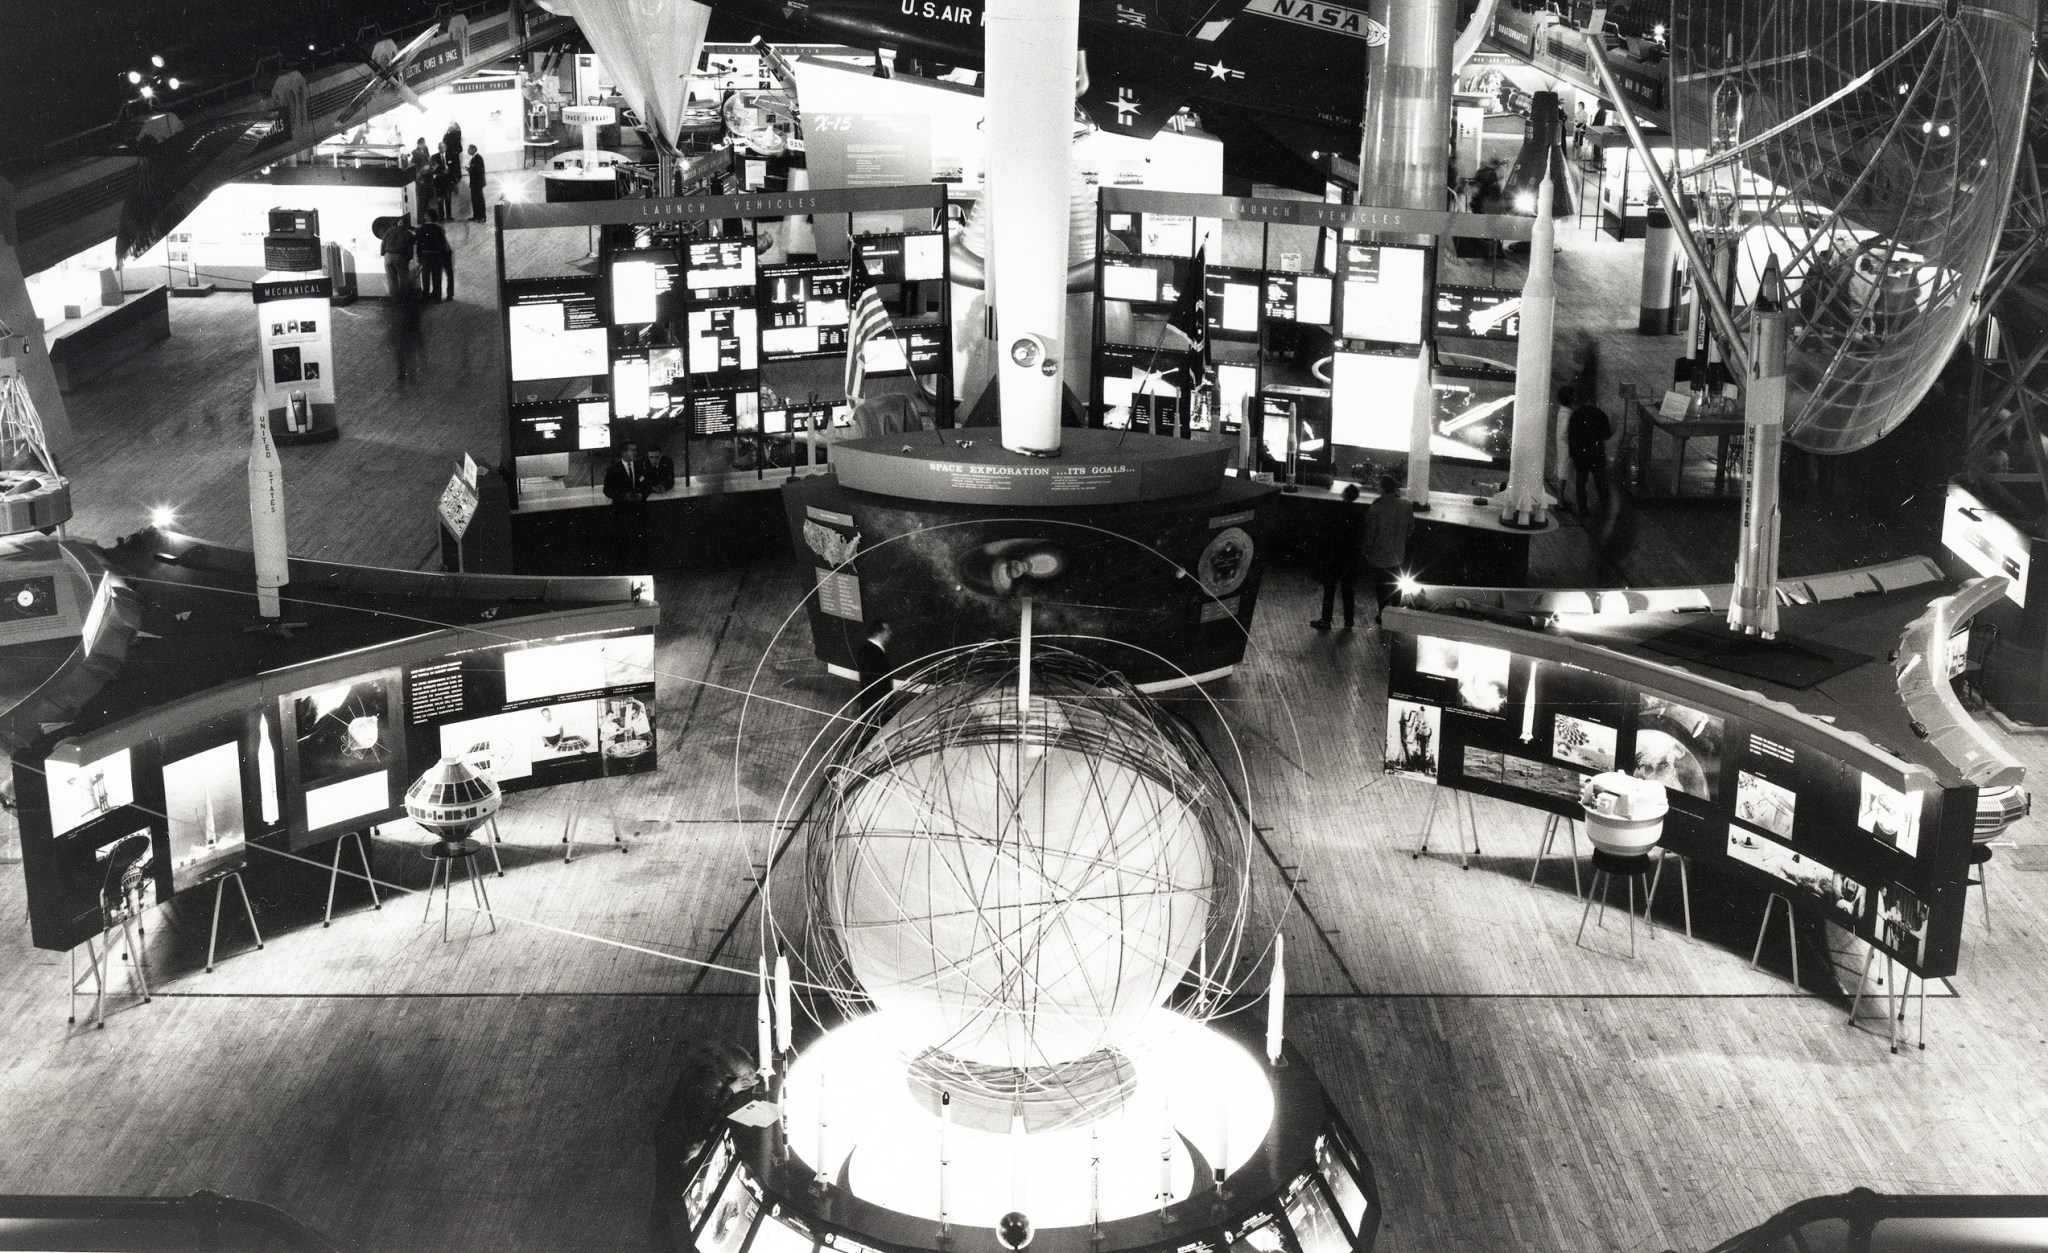 Overhead view of space exhibits.